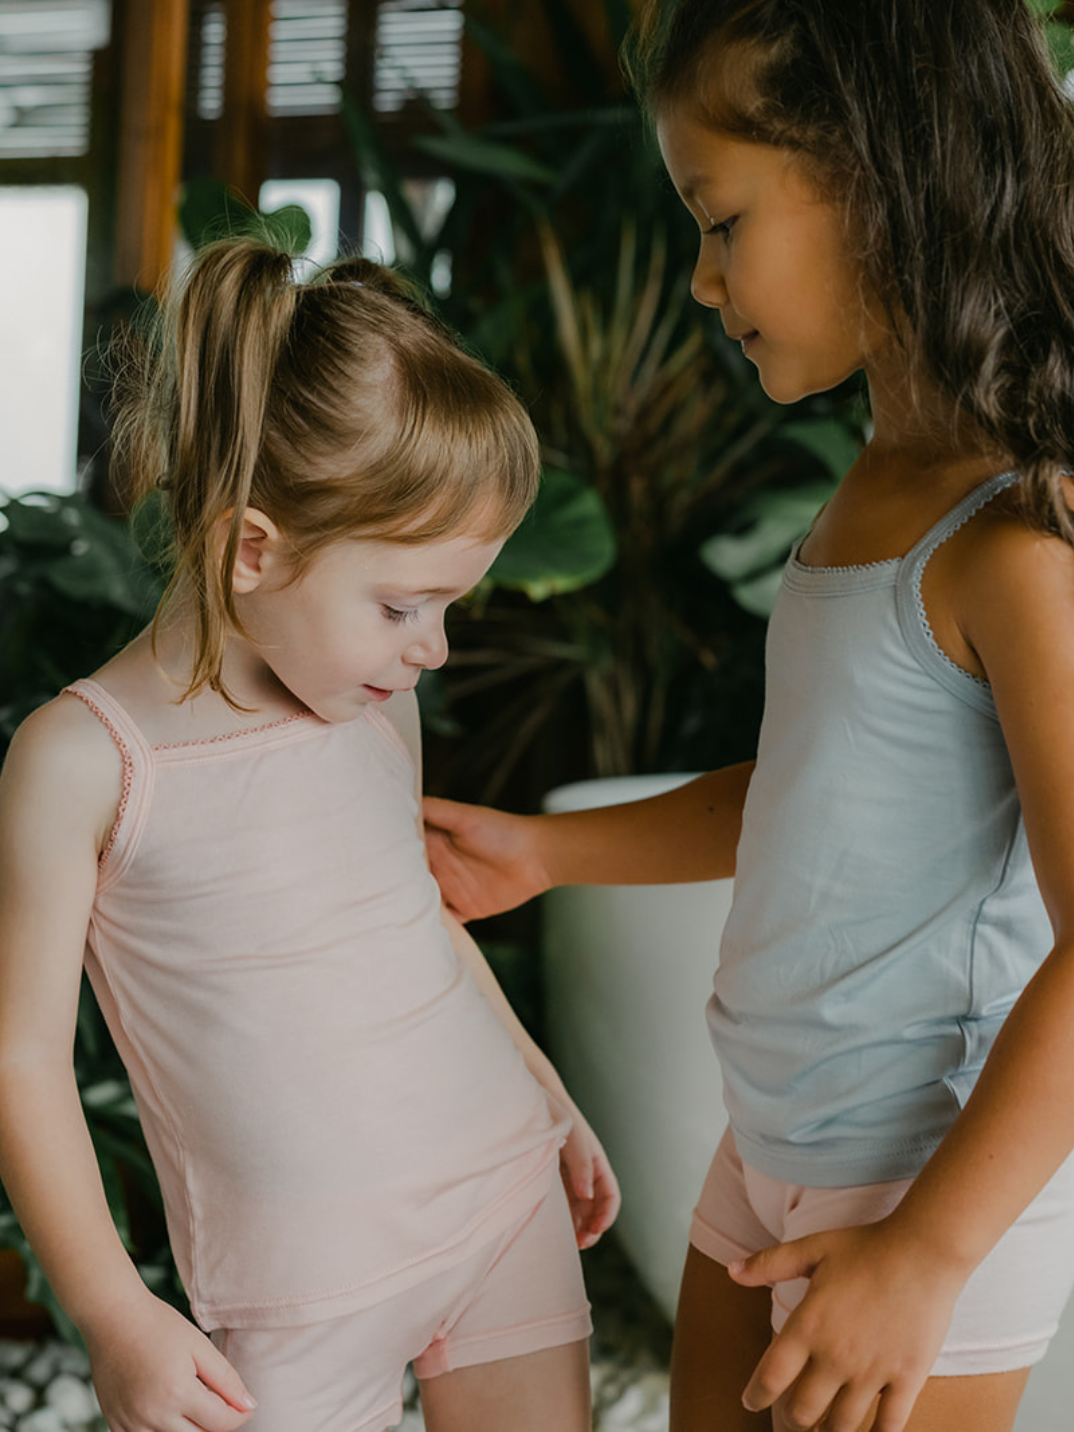 Just Peachy Camisoles are super soft and gentle on your little ones' skin. Designed with a snug fit for play, movement and a comfy night's rest. Add the breathable Camisole layer under your day clothes or snooze in maximum comfort. Pink and blue children's camis. Comes in a 2-pack